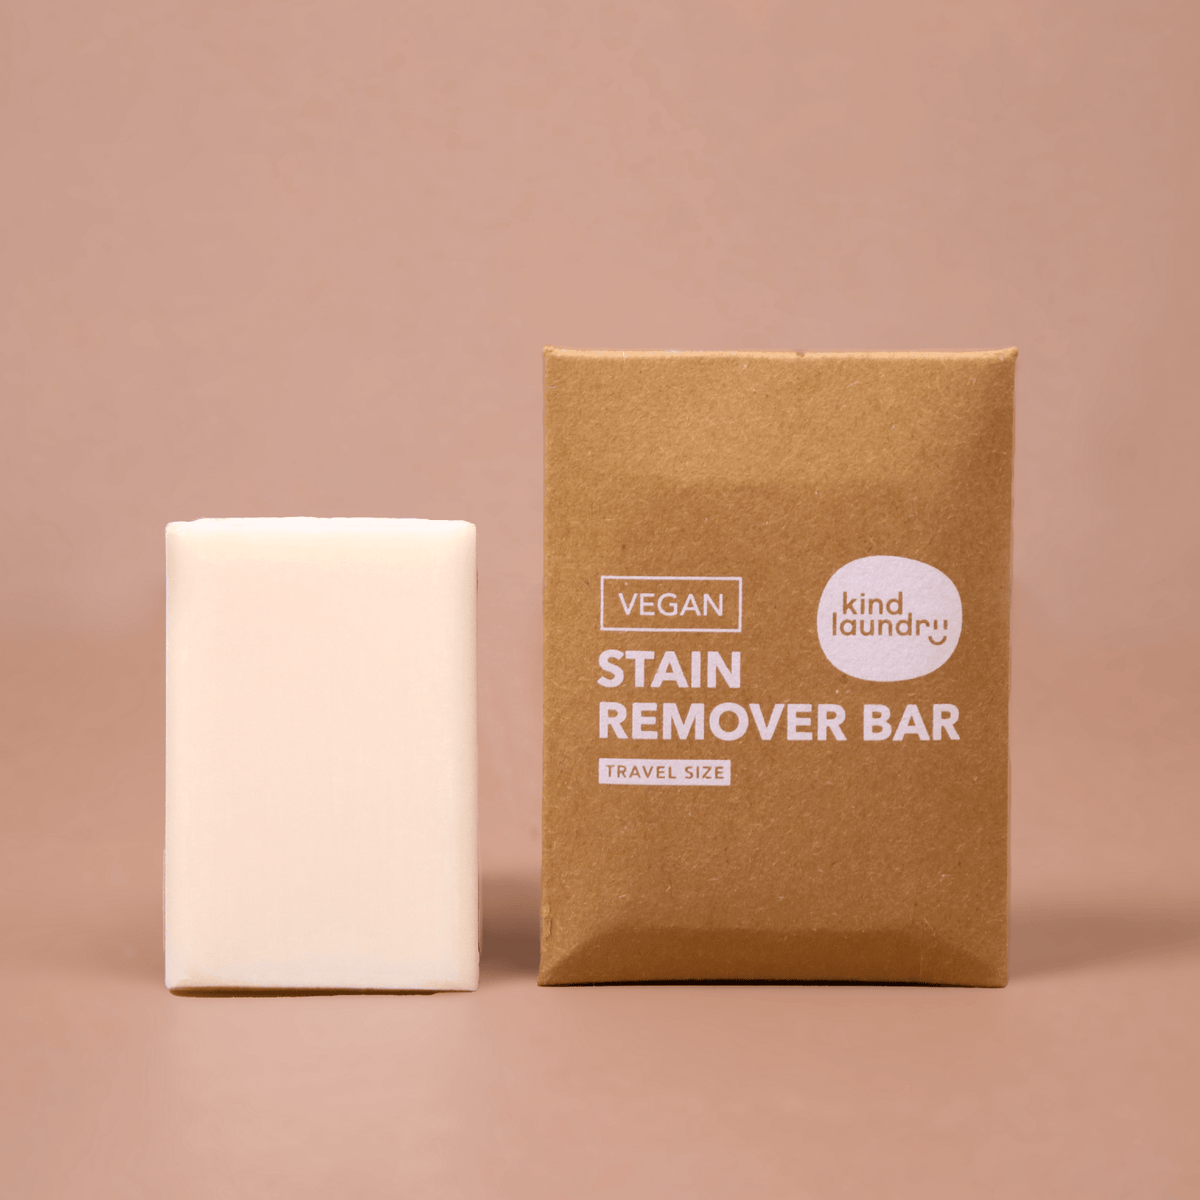 Load image into Gallery viewer, Vegan Stain Remover Bar (Travel Size) - Echo Market
